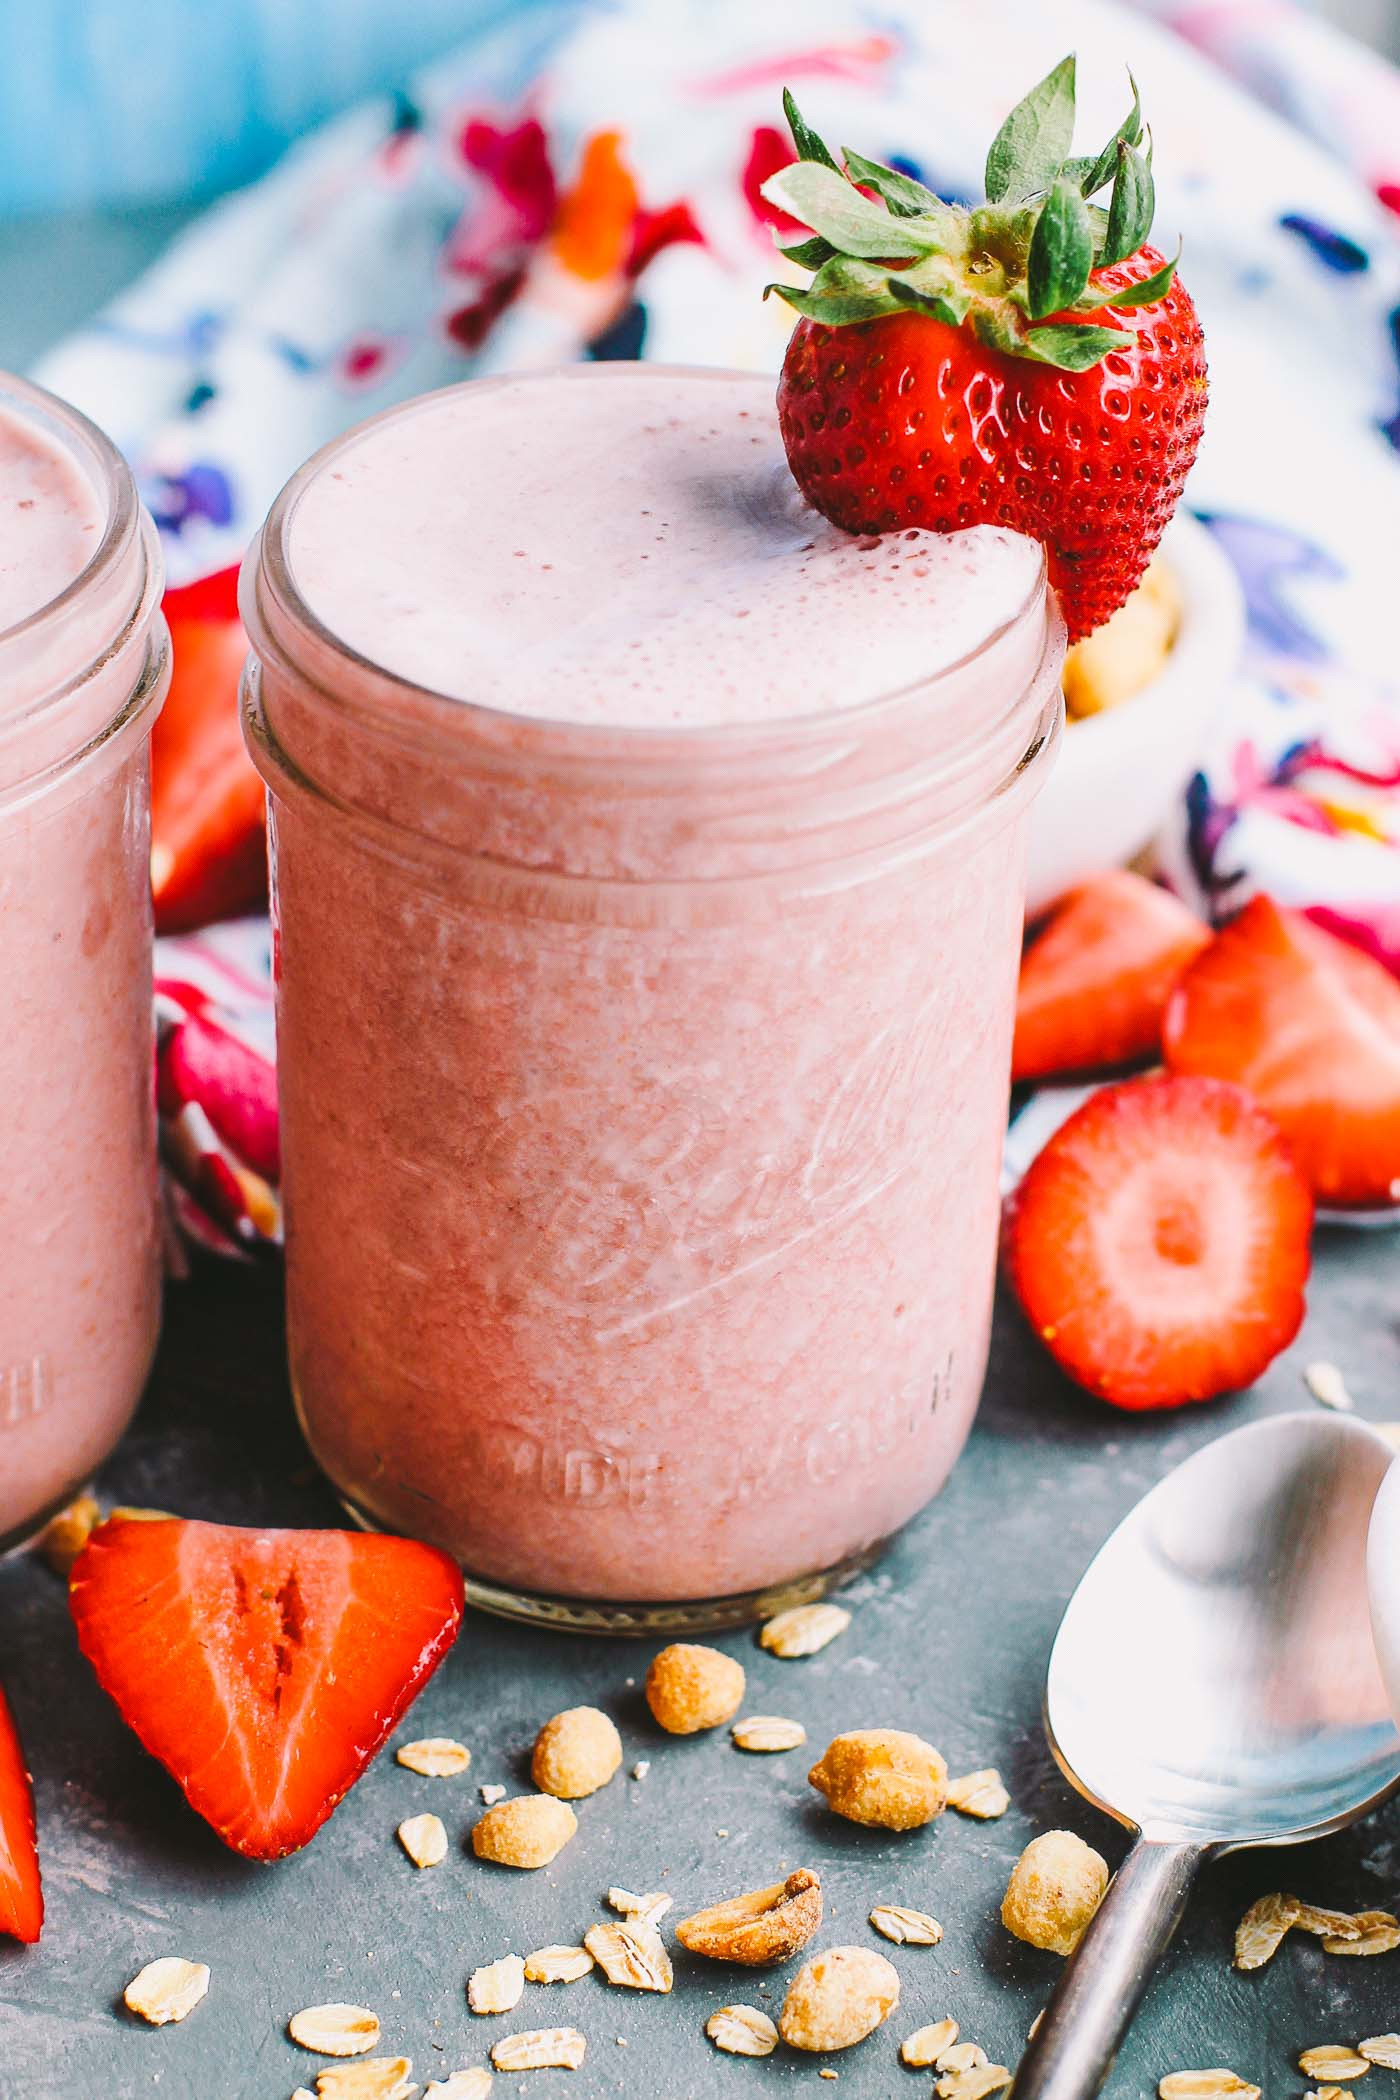 Healthy Protein Smoothie Recipes
 strawberry pb&j protein smoothies plays well with butter